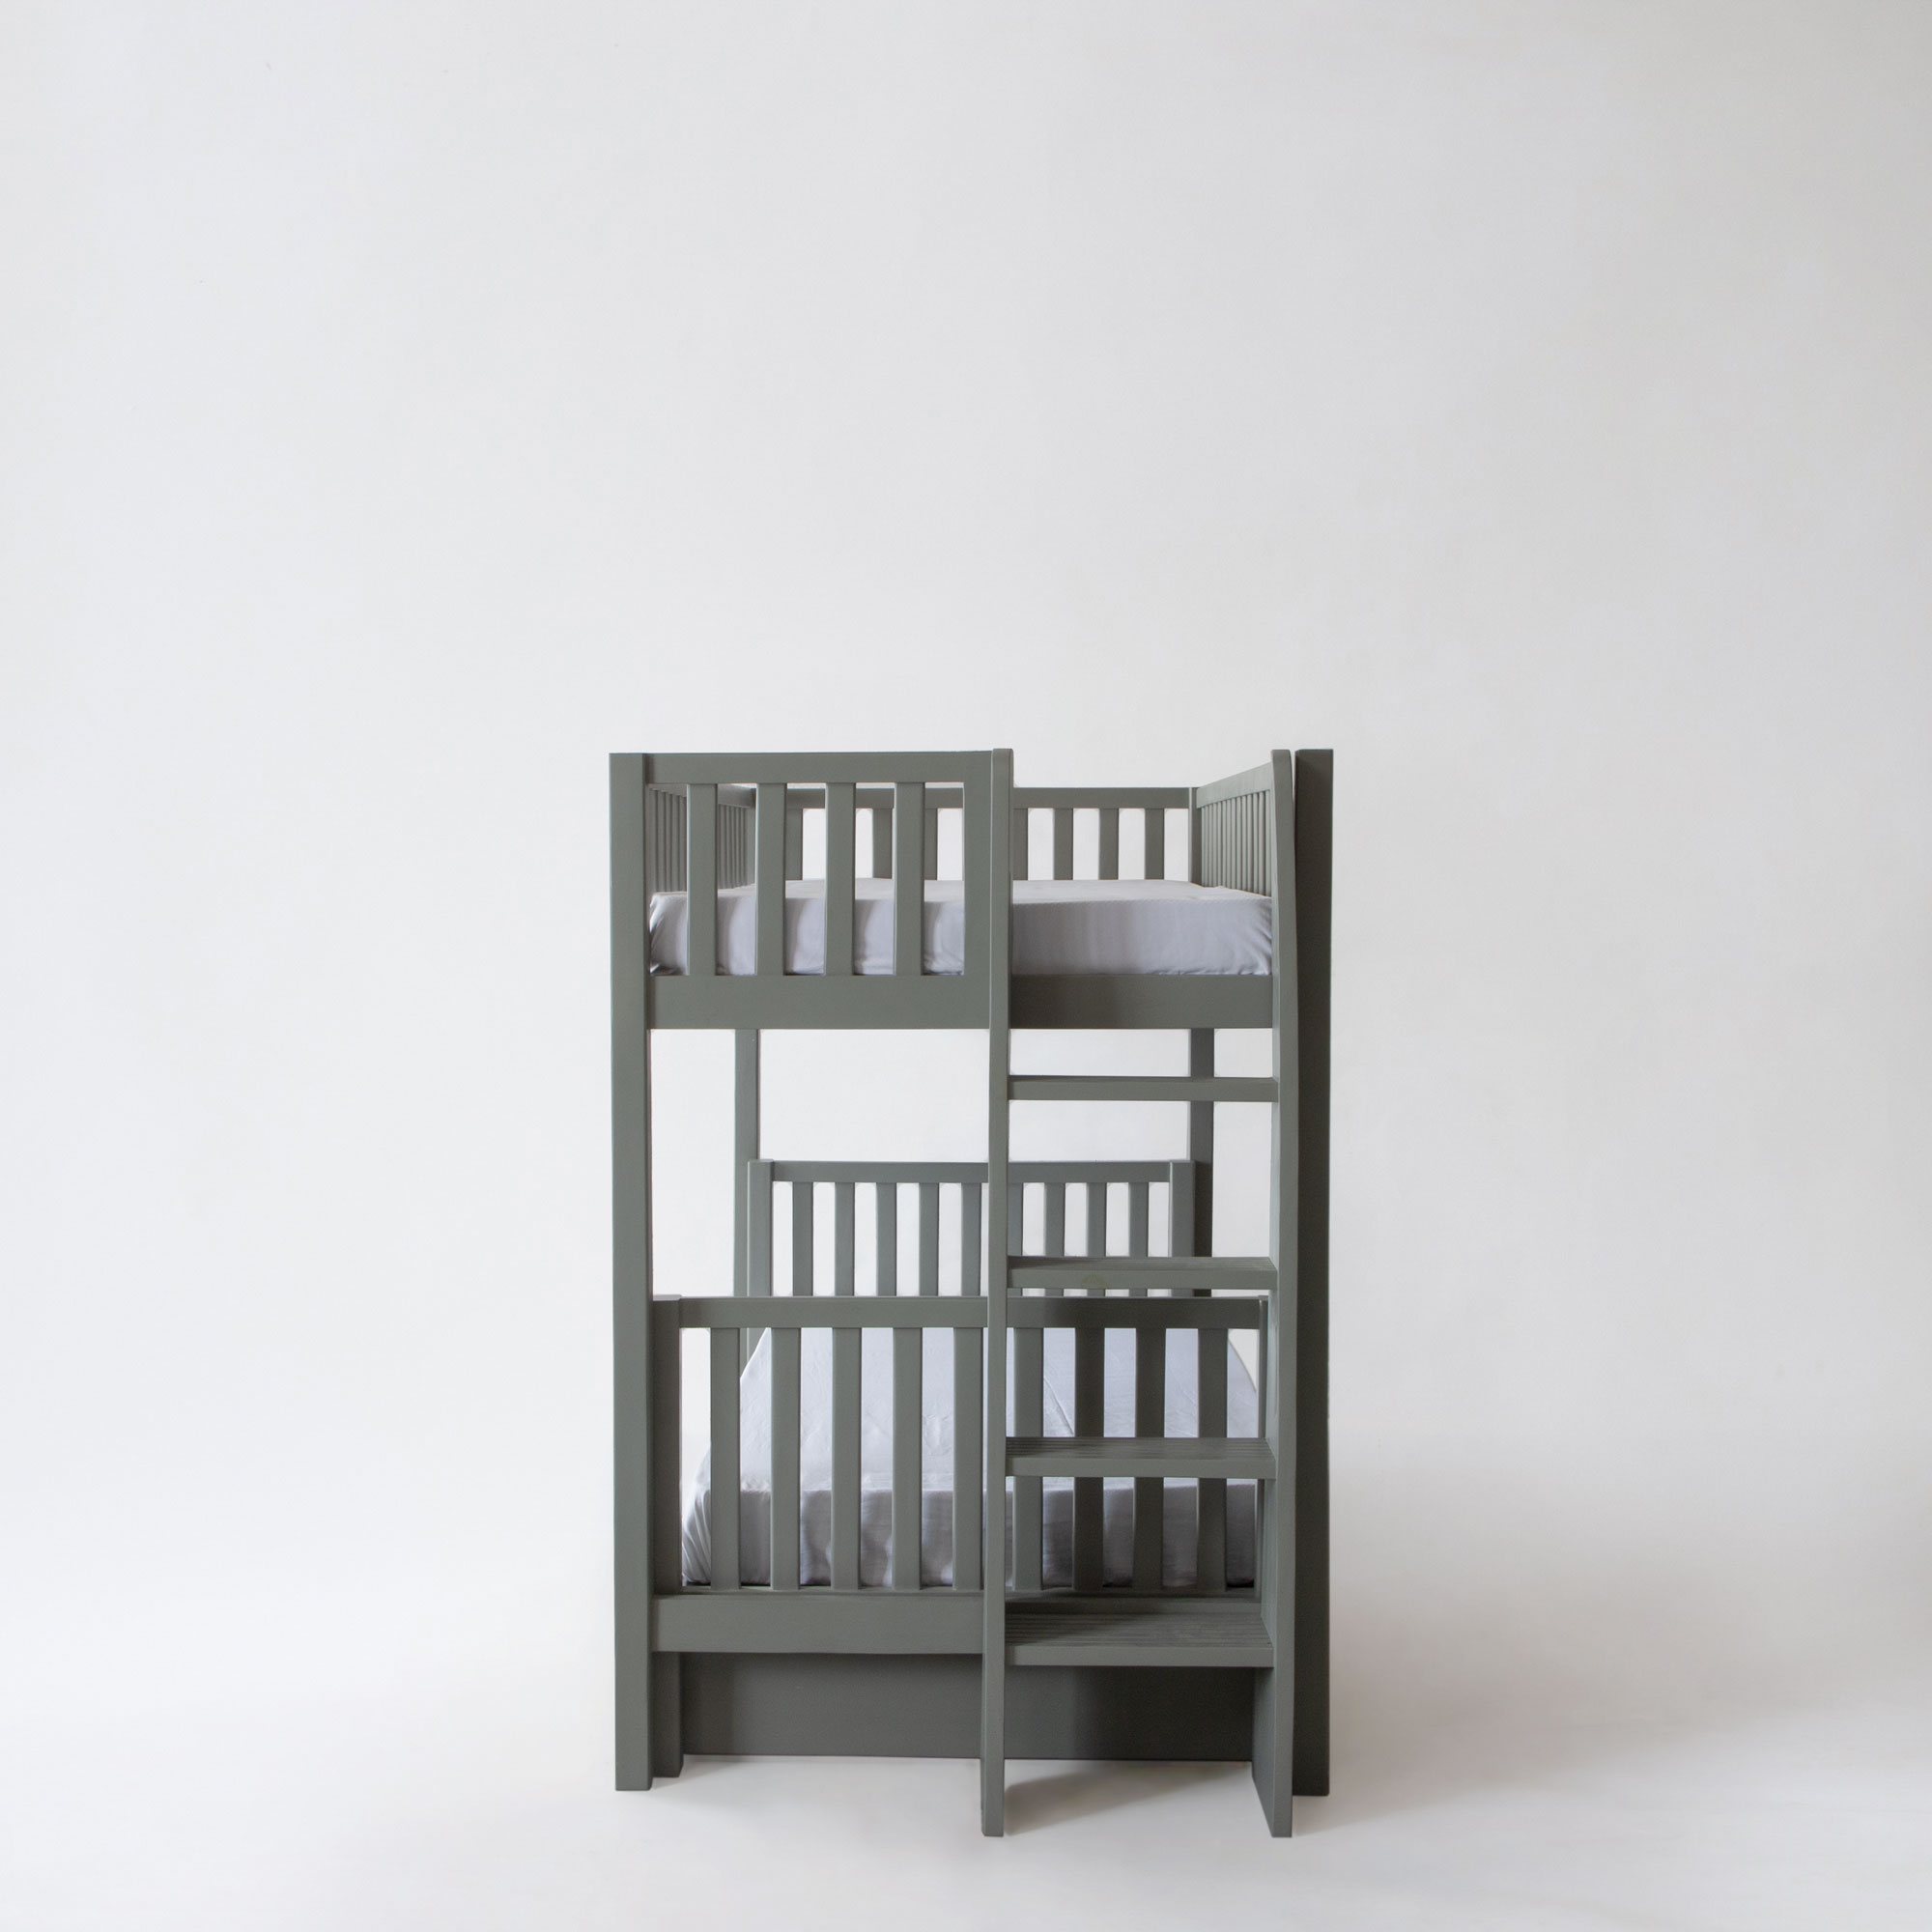 Island Bunk Bed and Junior Dream Bed with trundle and ladder